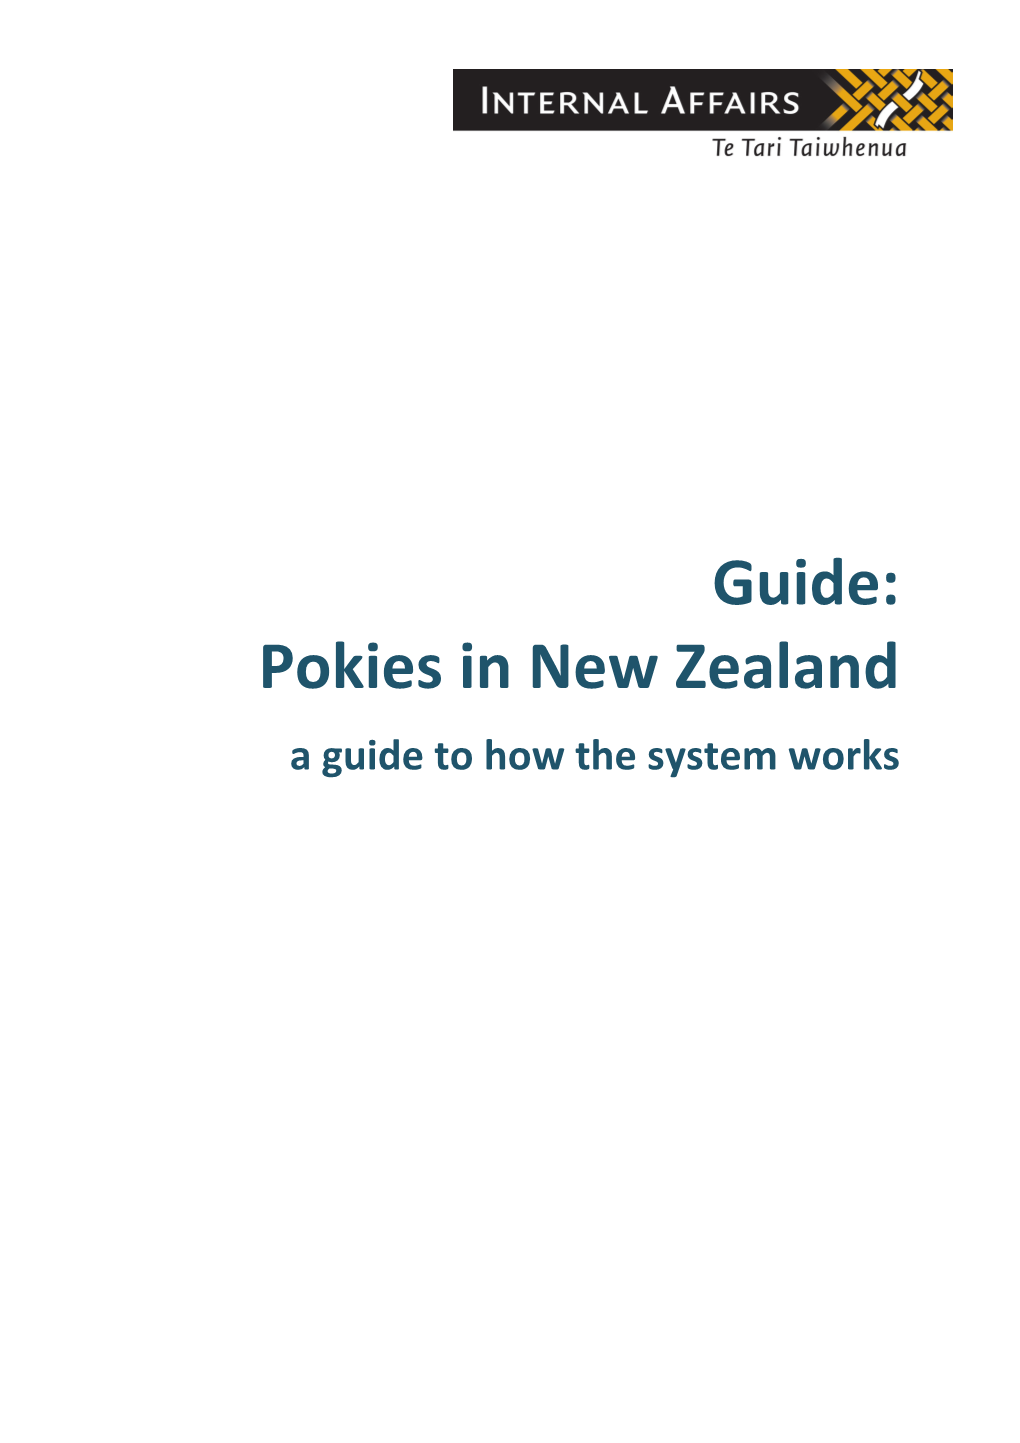 Pokies in New Zealand a Guide to How the System Works